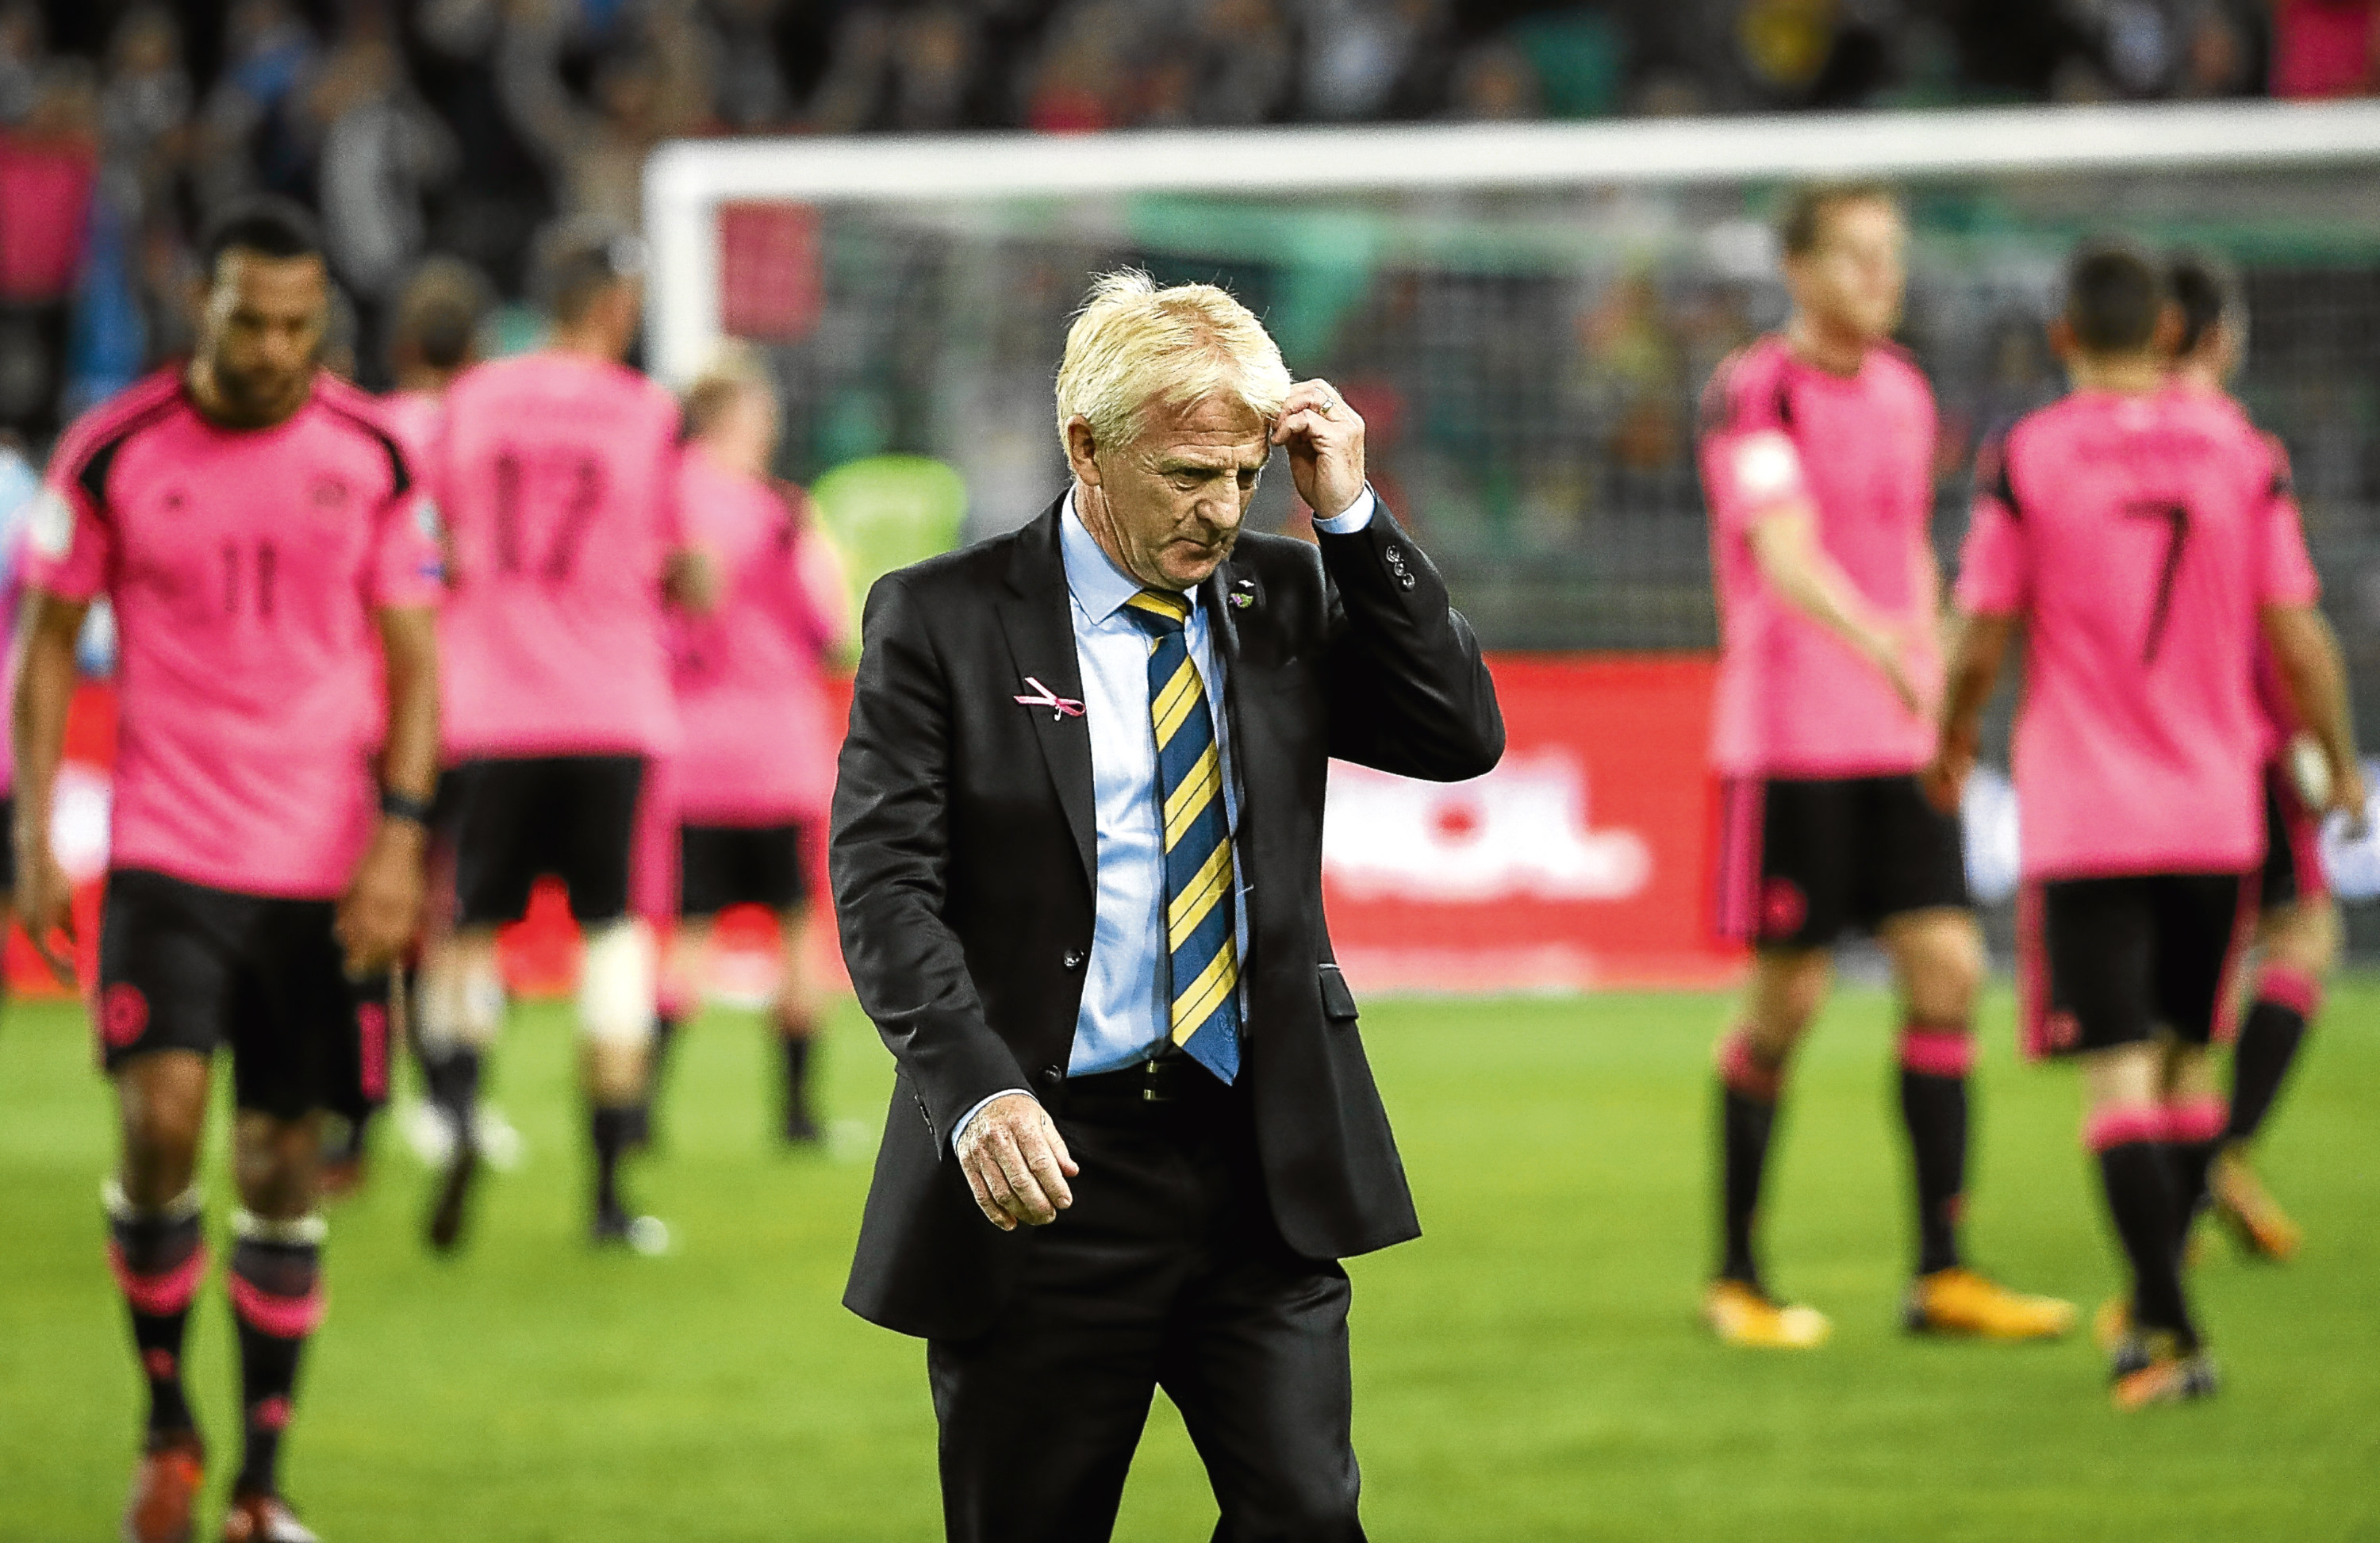 Gordon Strachan may be gone, and if Jim takes over, only players plying their trade in Scotland would get a Scotland game.